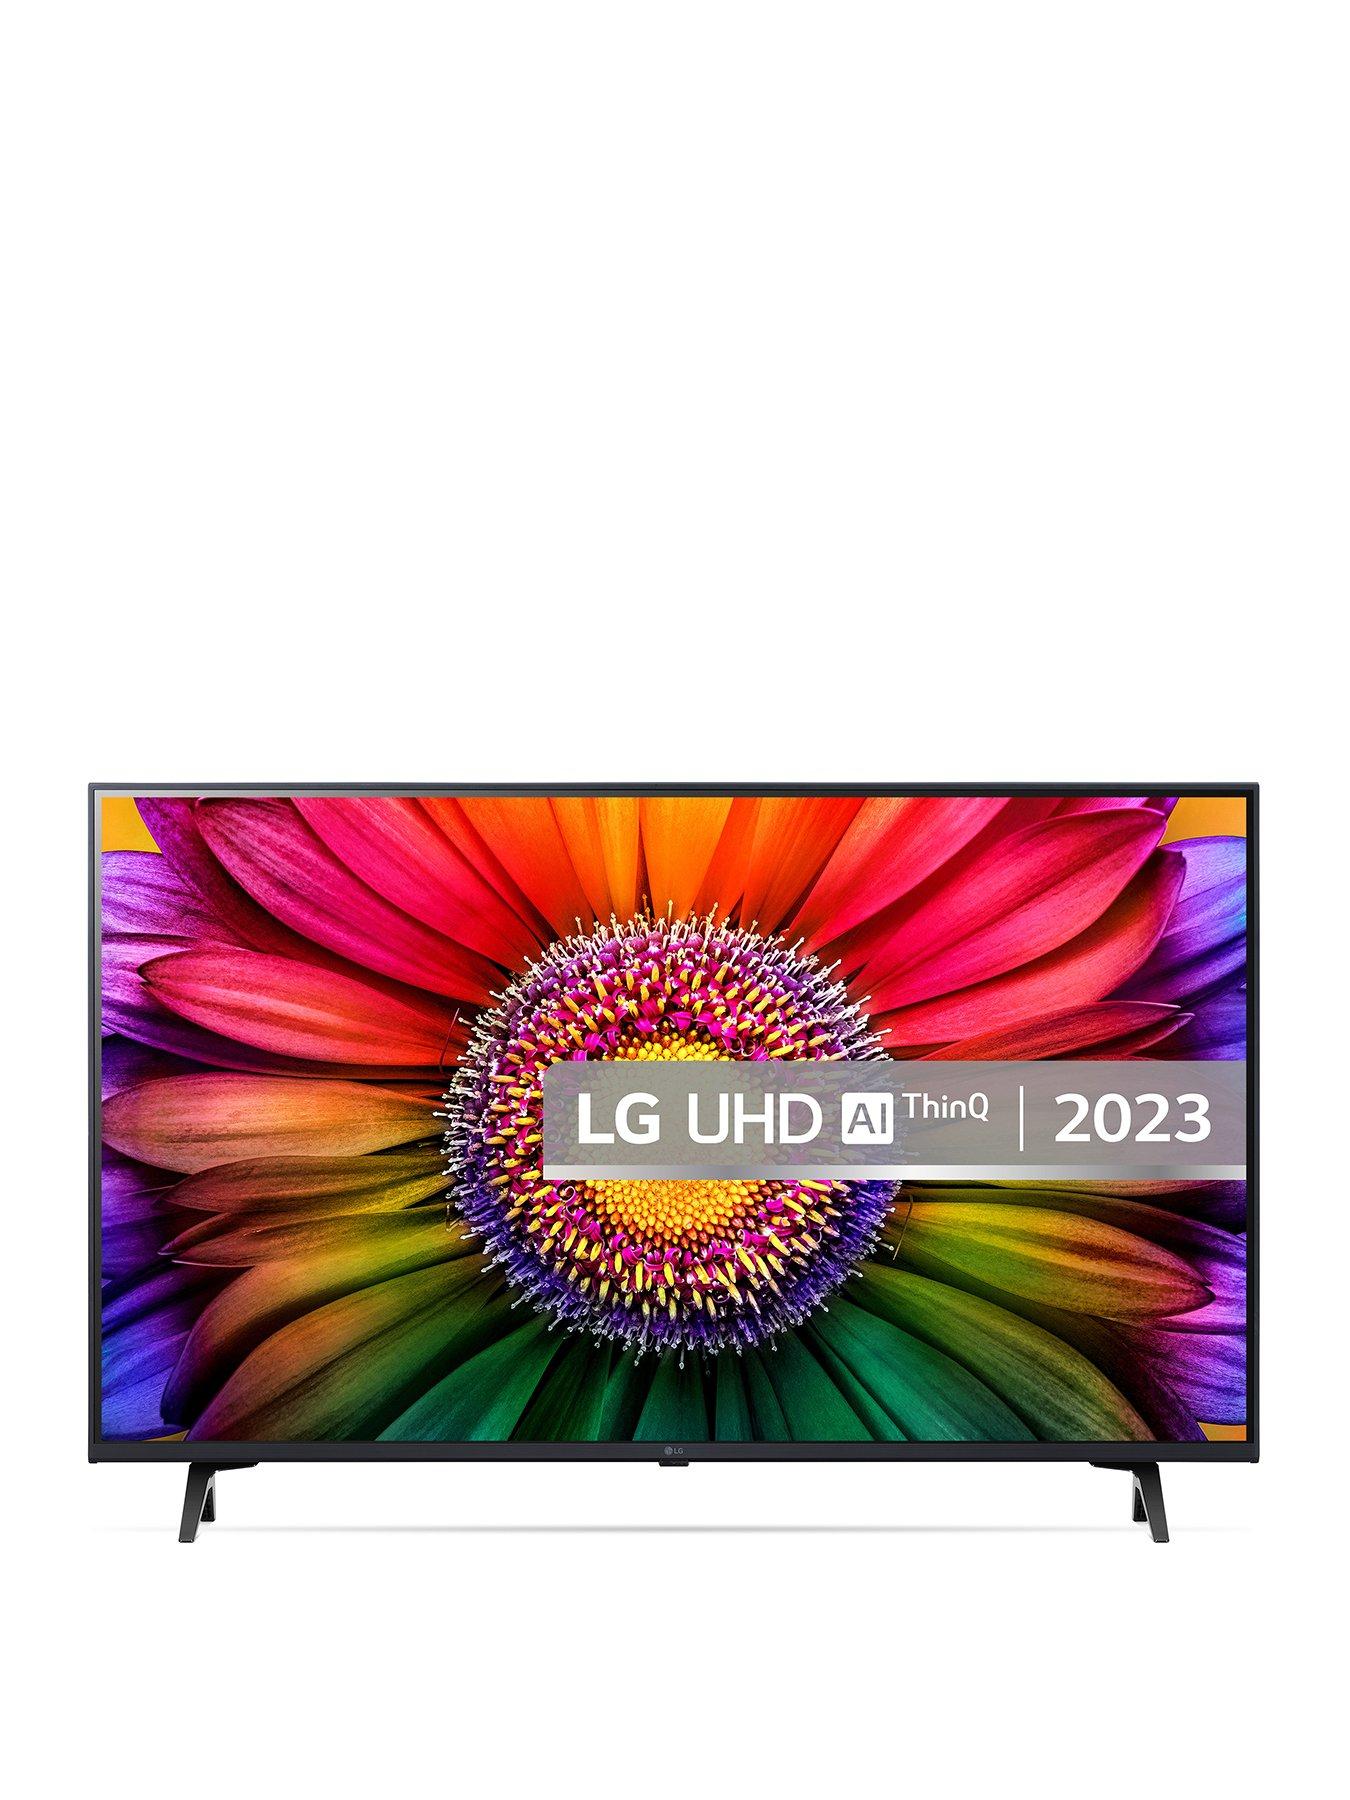 Televisions, Electricals, Lg